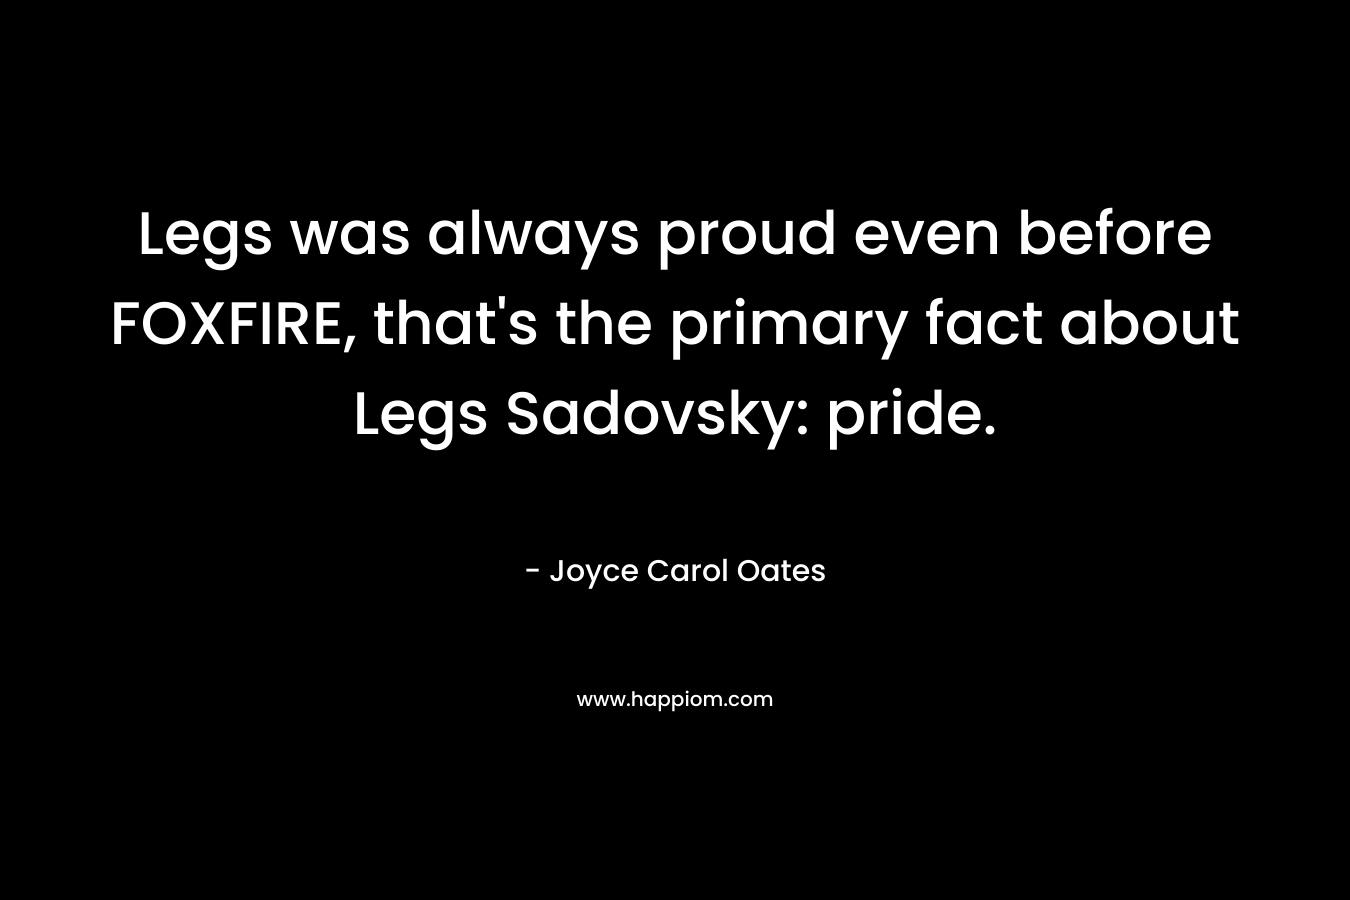 Legs was always proud even before FOXFIRE, that’s the primary fact about Legs Sadovsky: pride. – Joyce Carol Oates